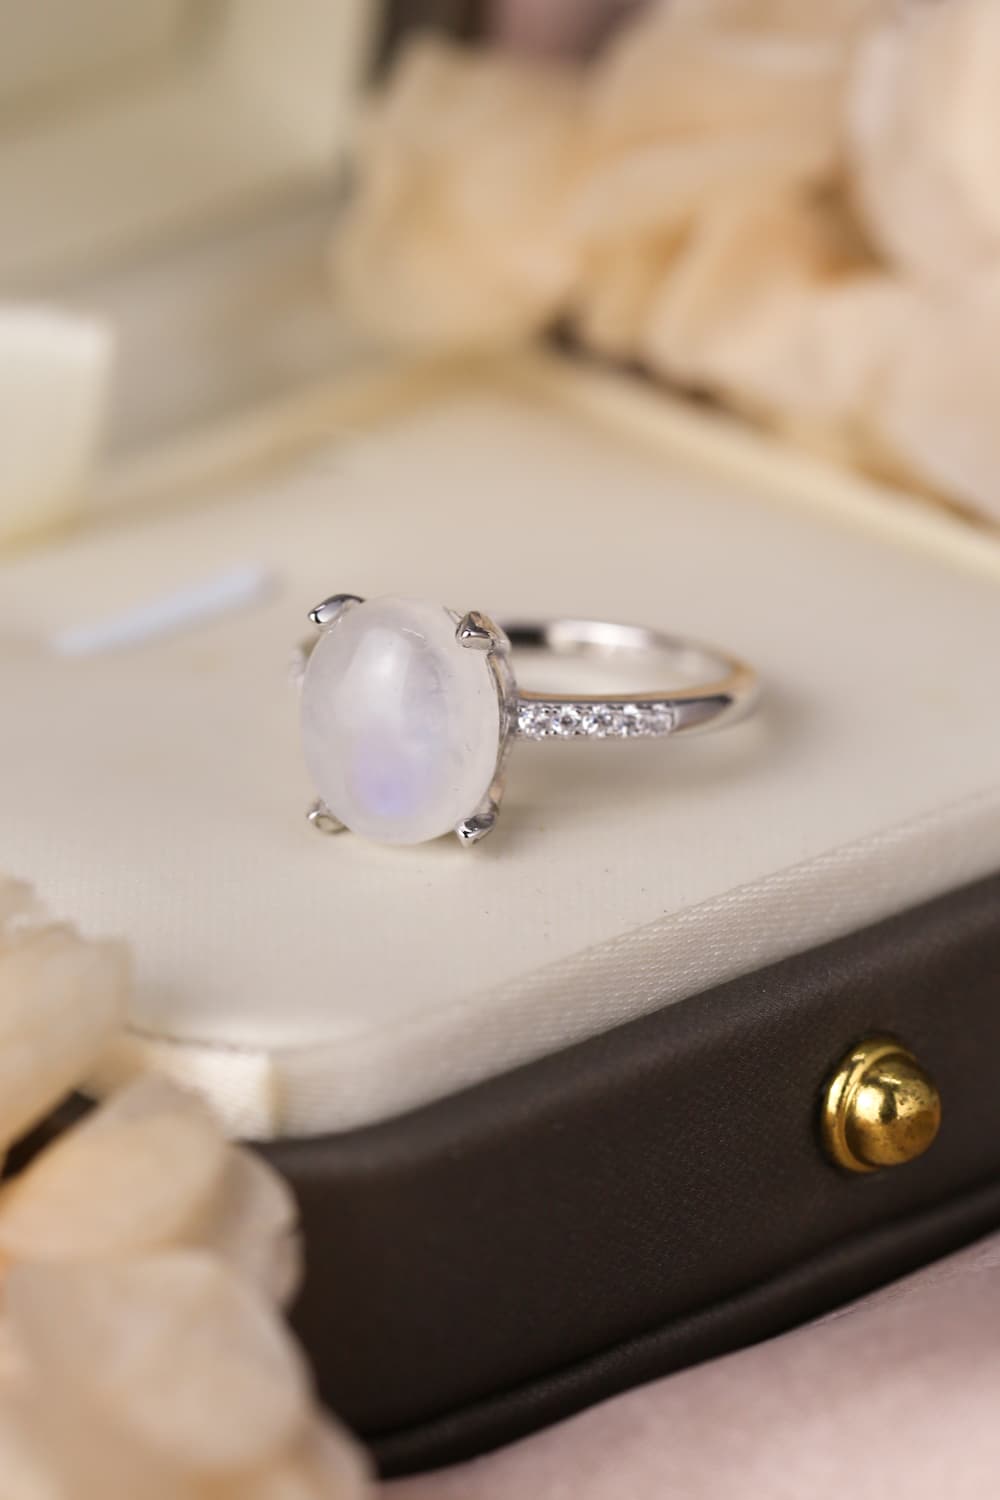 High Quality Natural Moonstone 925 Sterling Silver Side Stone Ring BLUE ZONE PLANET